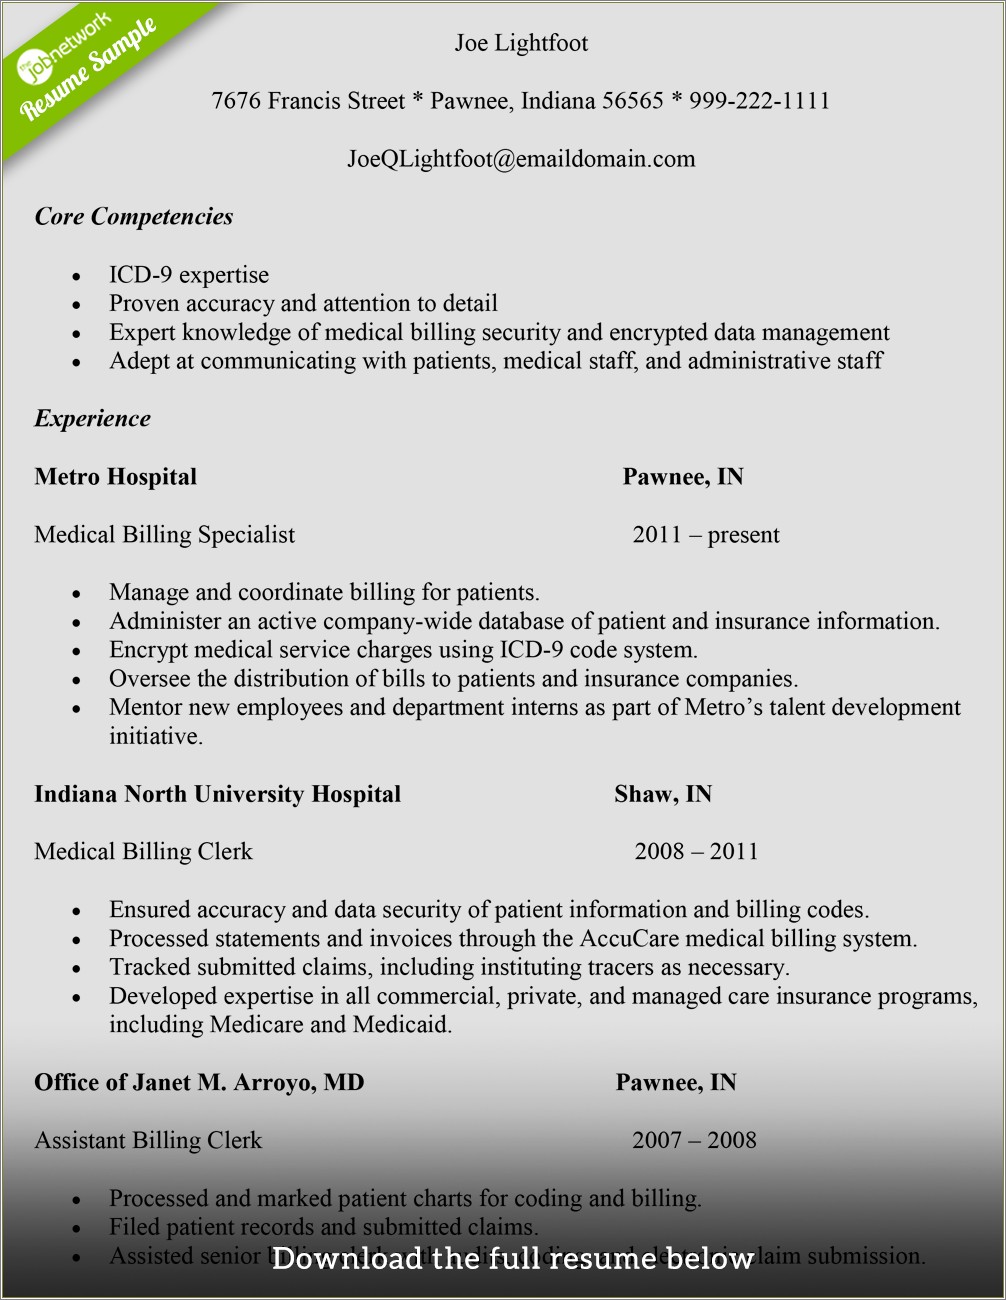 Professional Summary For Medical Billing Resume